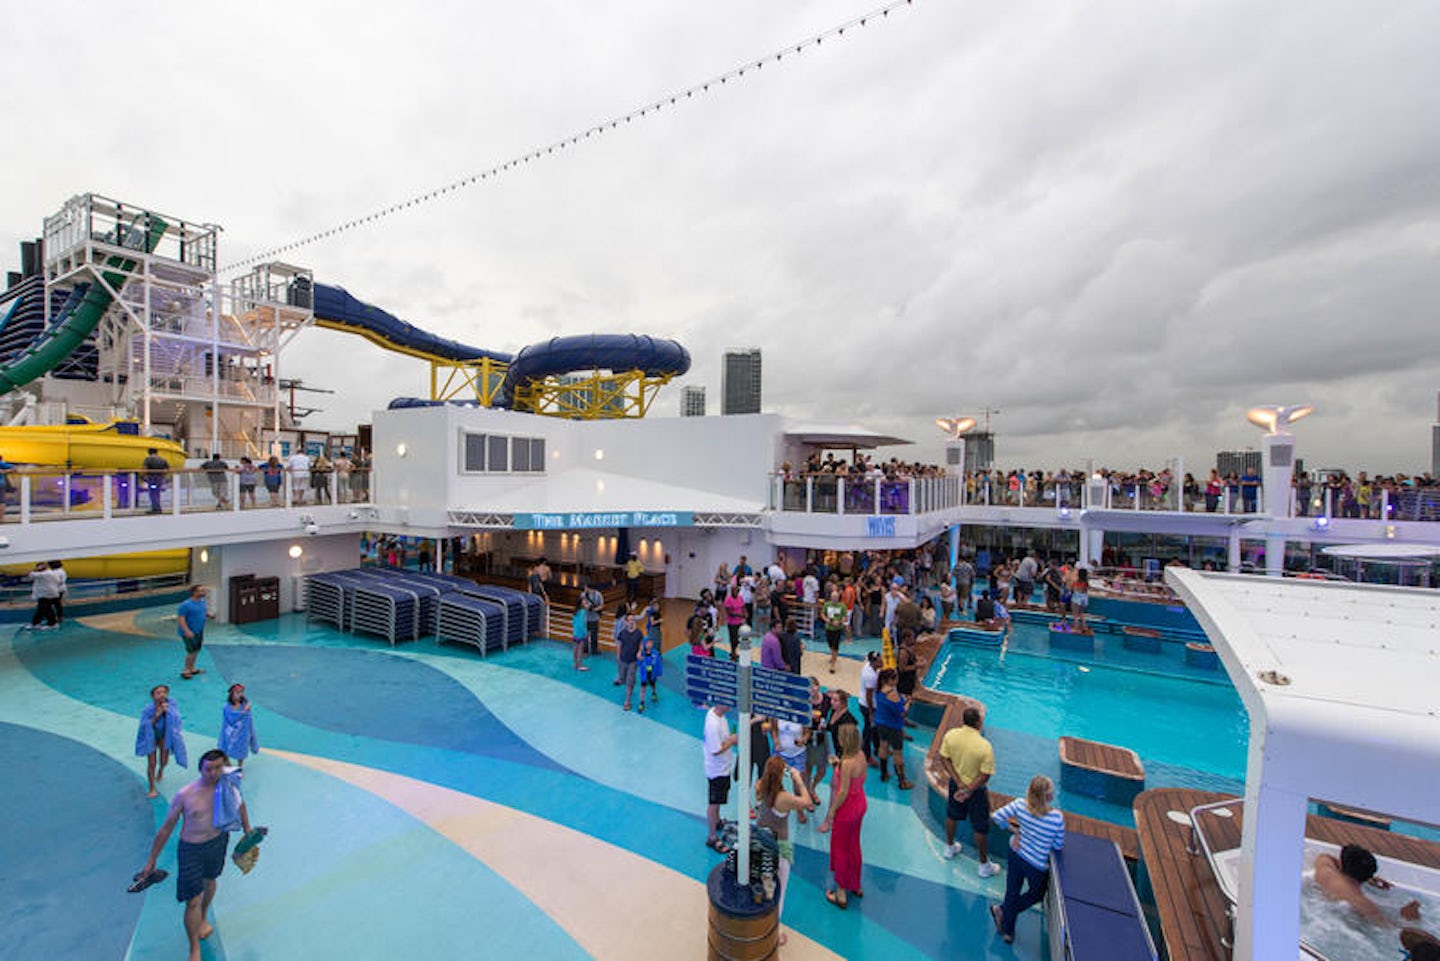 Sailaway Party on Norwegian Escape